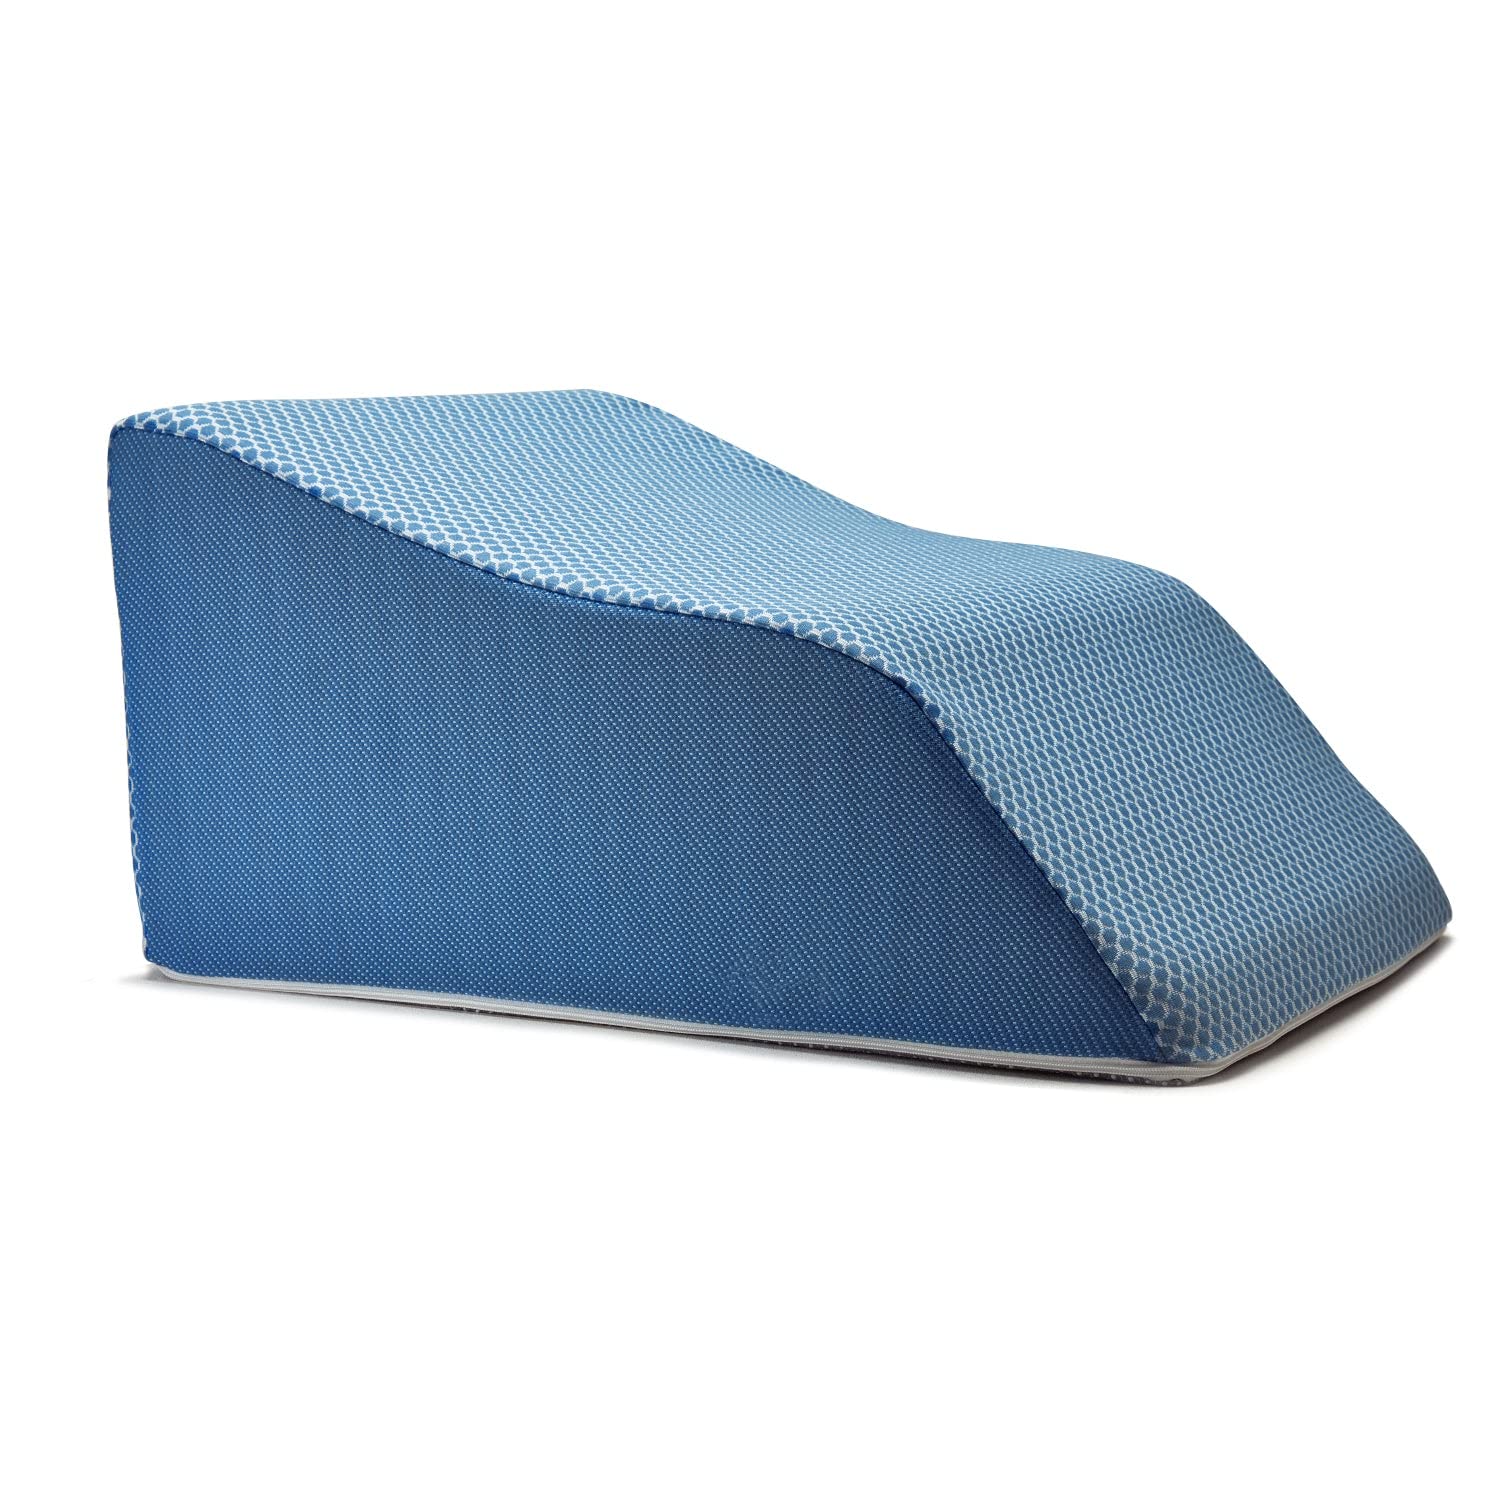 Lounge Doctor Elevating Leg Rest Pillow with Memory Foam, Small, 18 in. Wide, Light Blue, Uniquely Designed Incline Wedge for Vein Circulation, Leg Swelling, Lymphedema, Leg and Back Pain, Relaxation